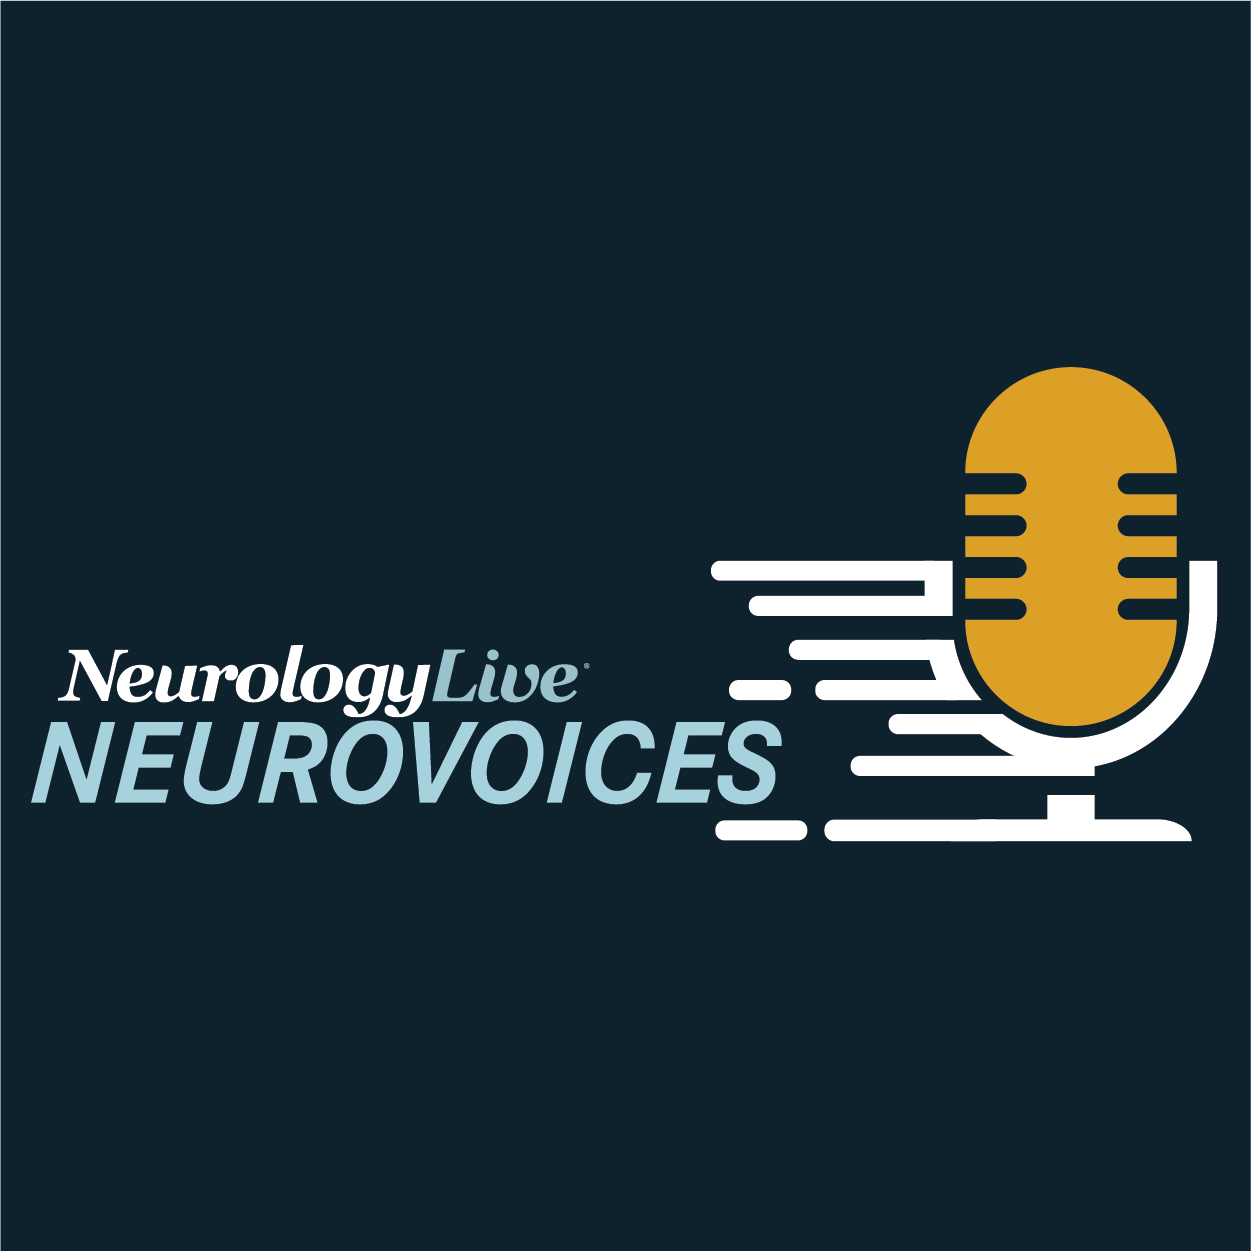 NeuroVoices: Jessica Ailani, MD, on Implications of DELIVER Analysis With Eptinezumab for Migraine Prevention